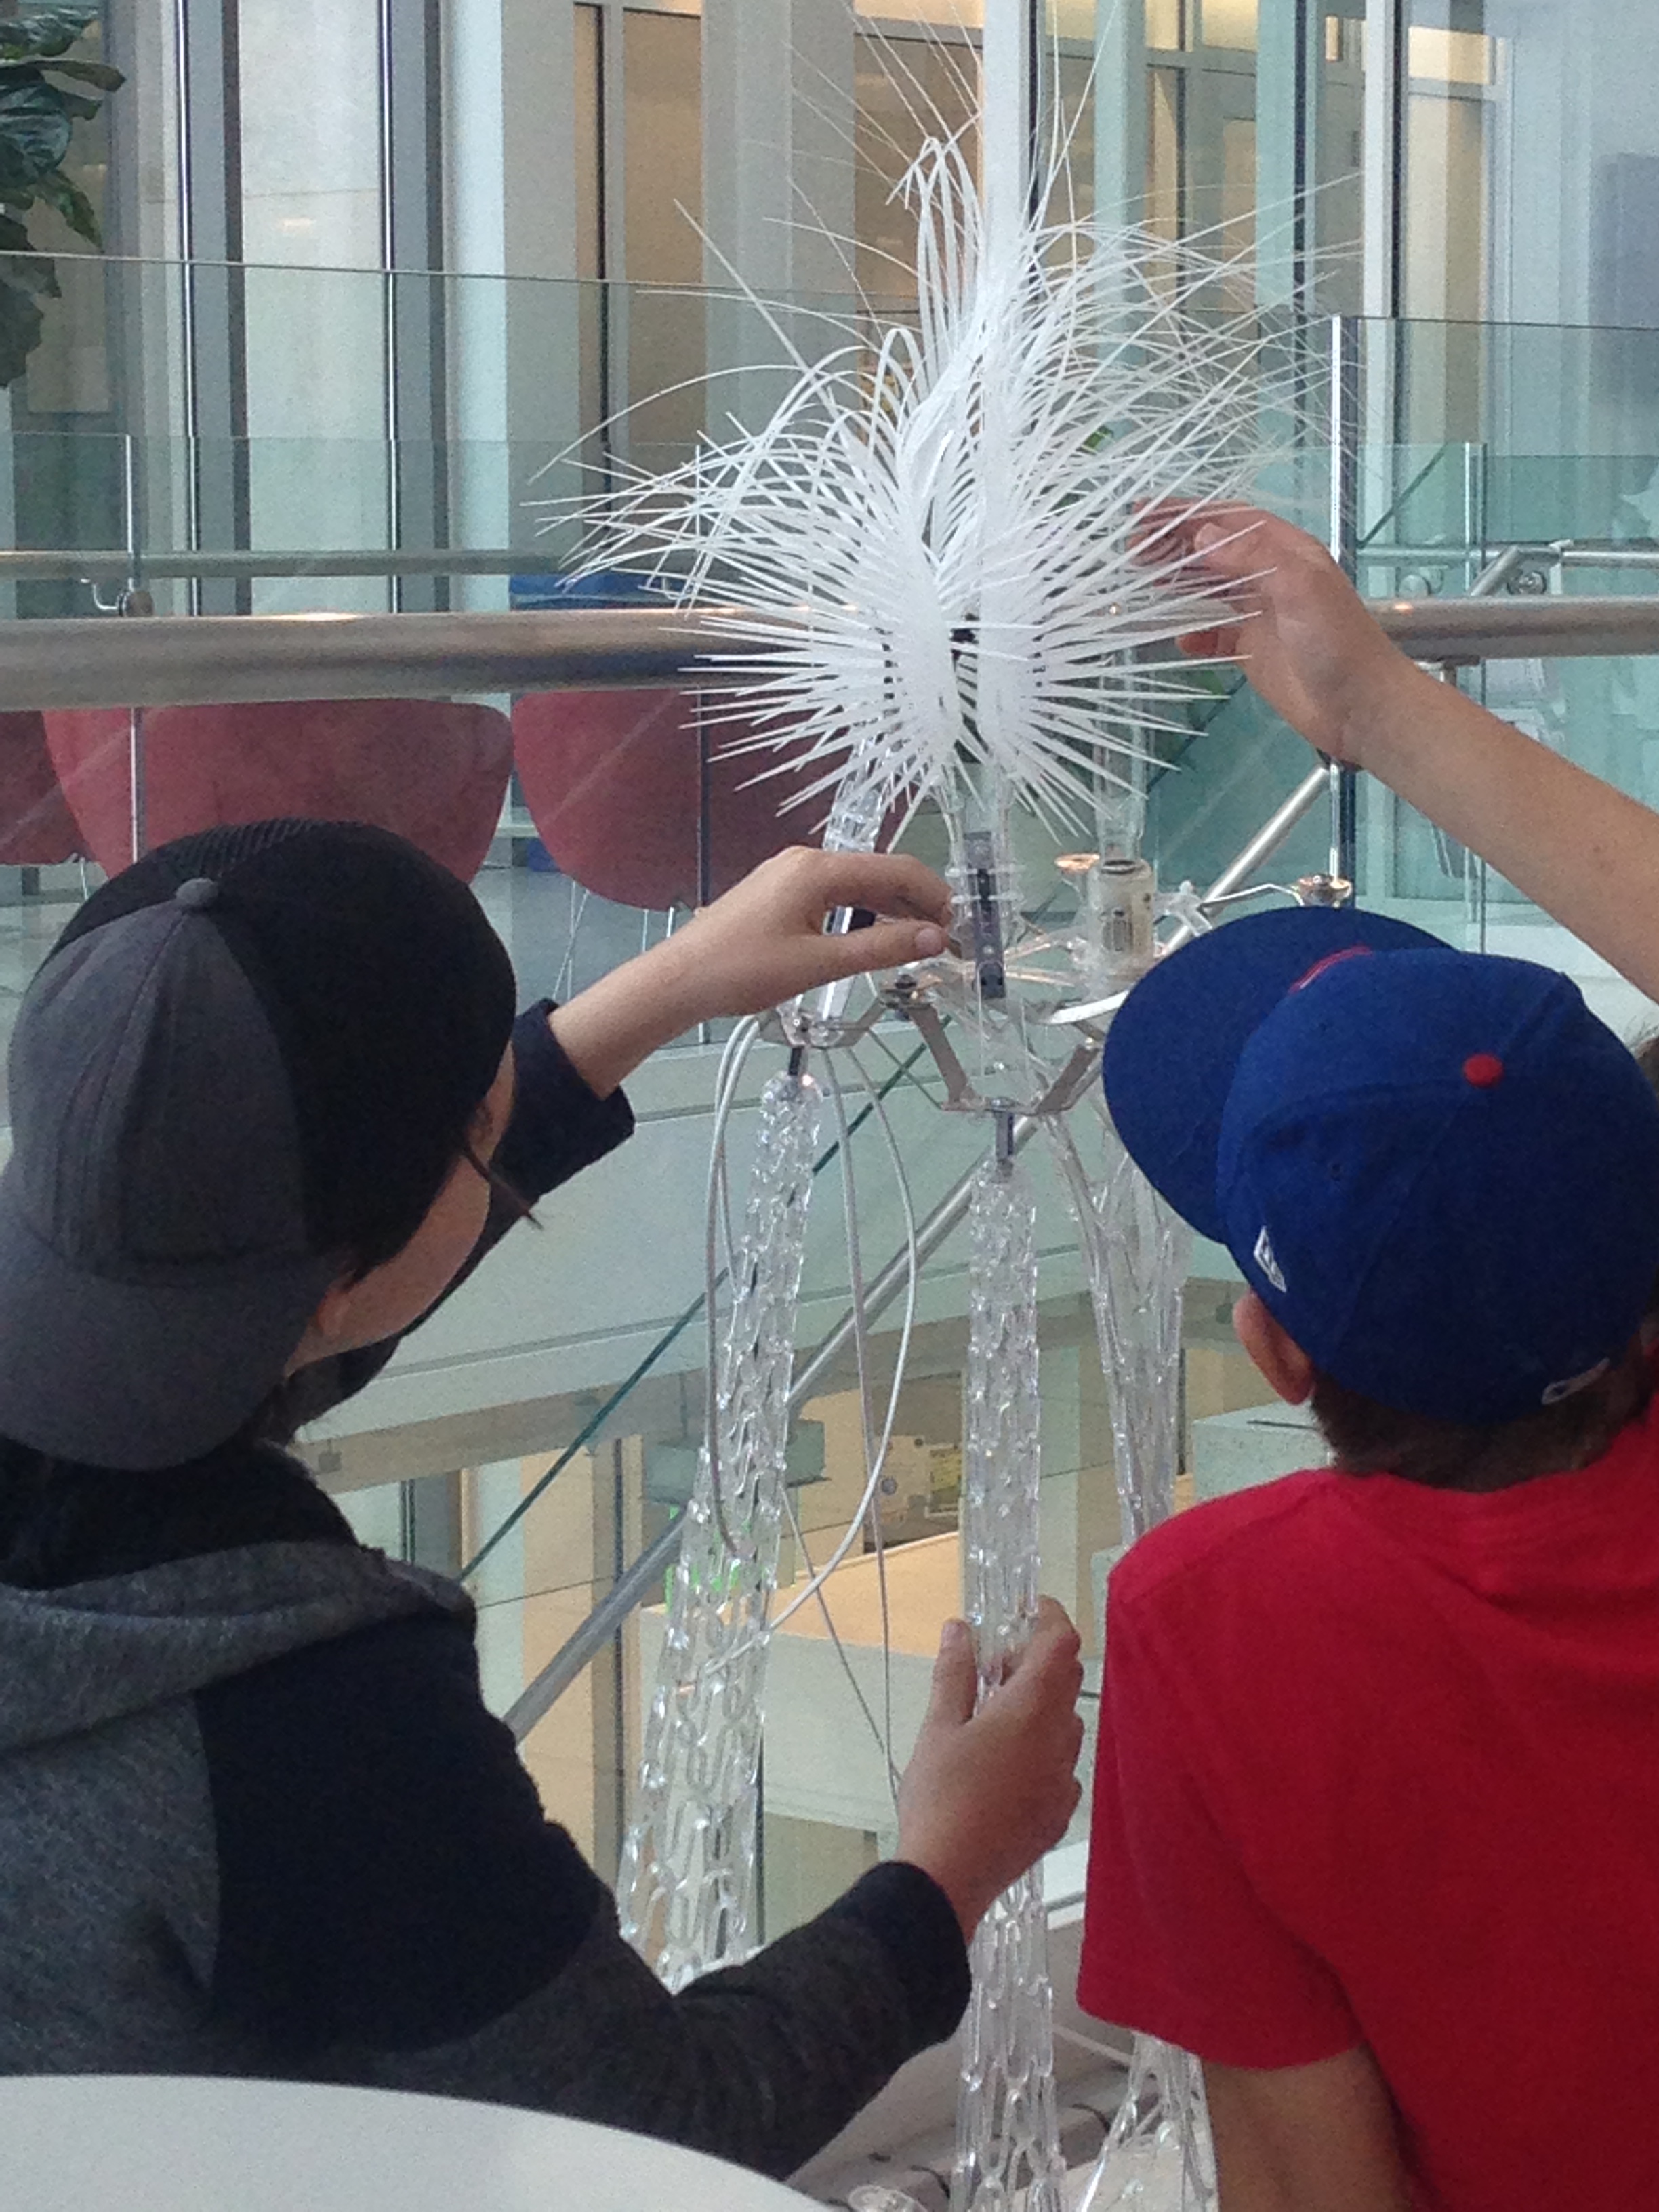 Two children interacting with, and looking closely at part of a sculpture that is designed to respond to humans through a series of sensors.